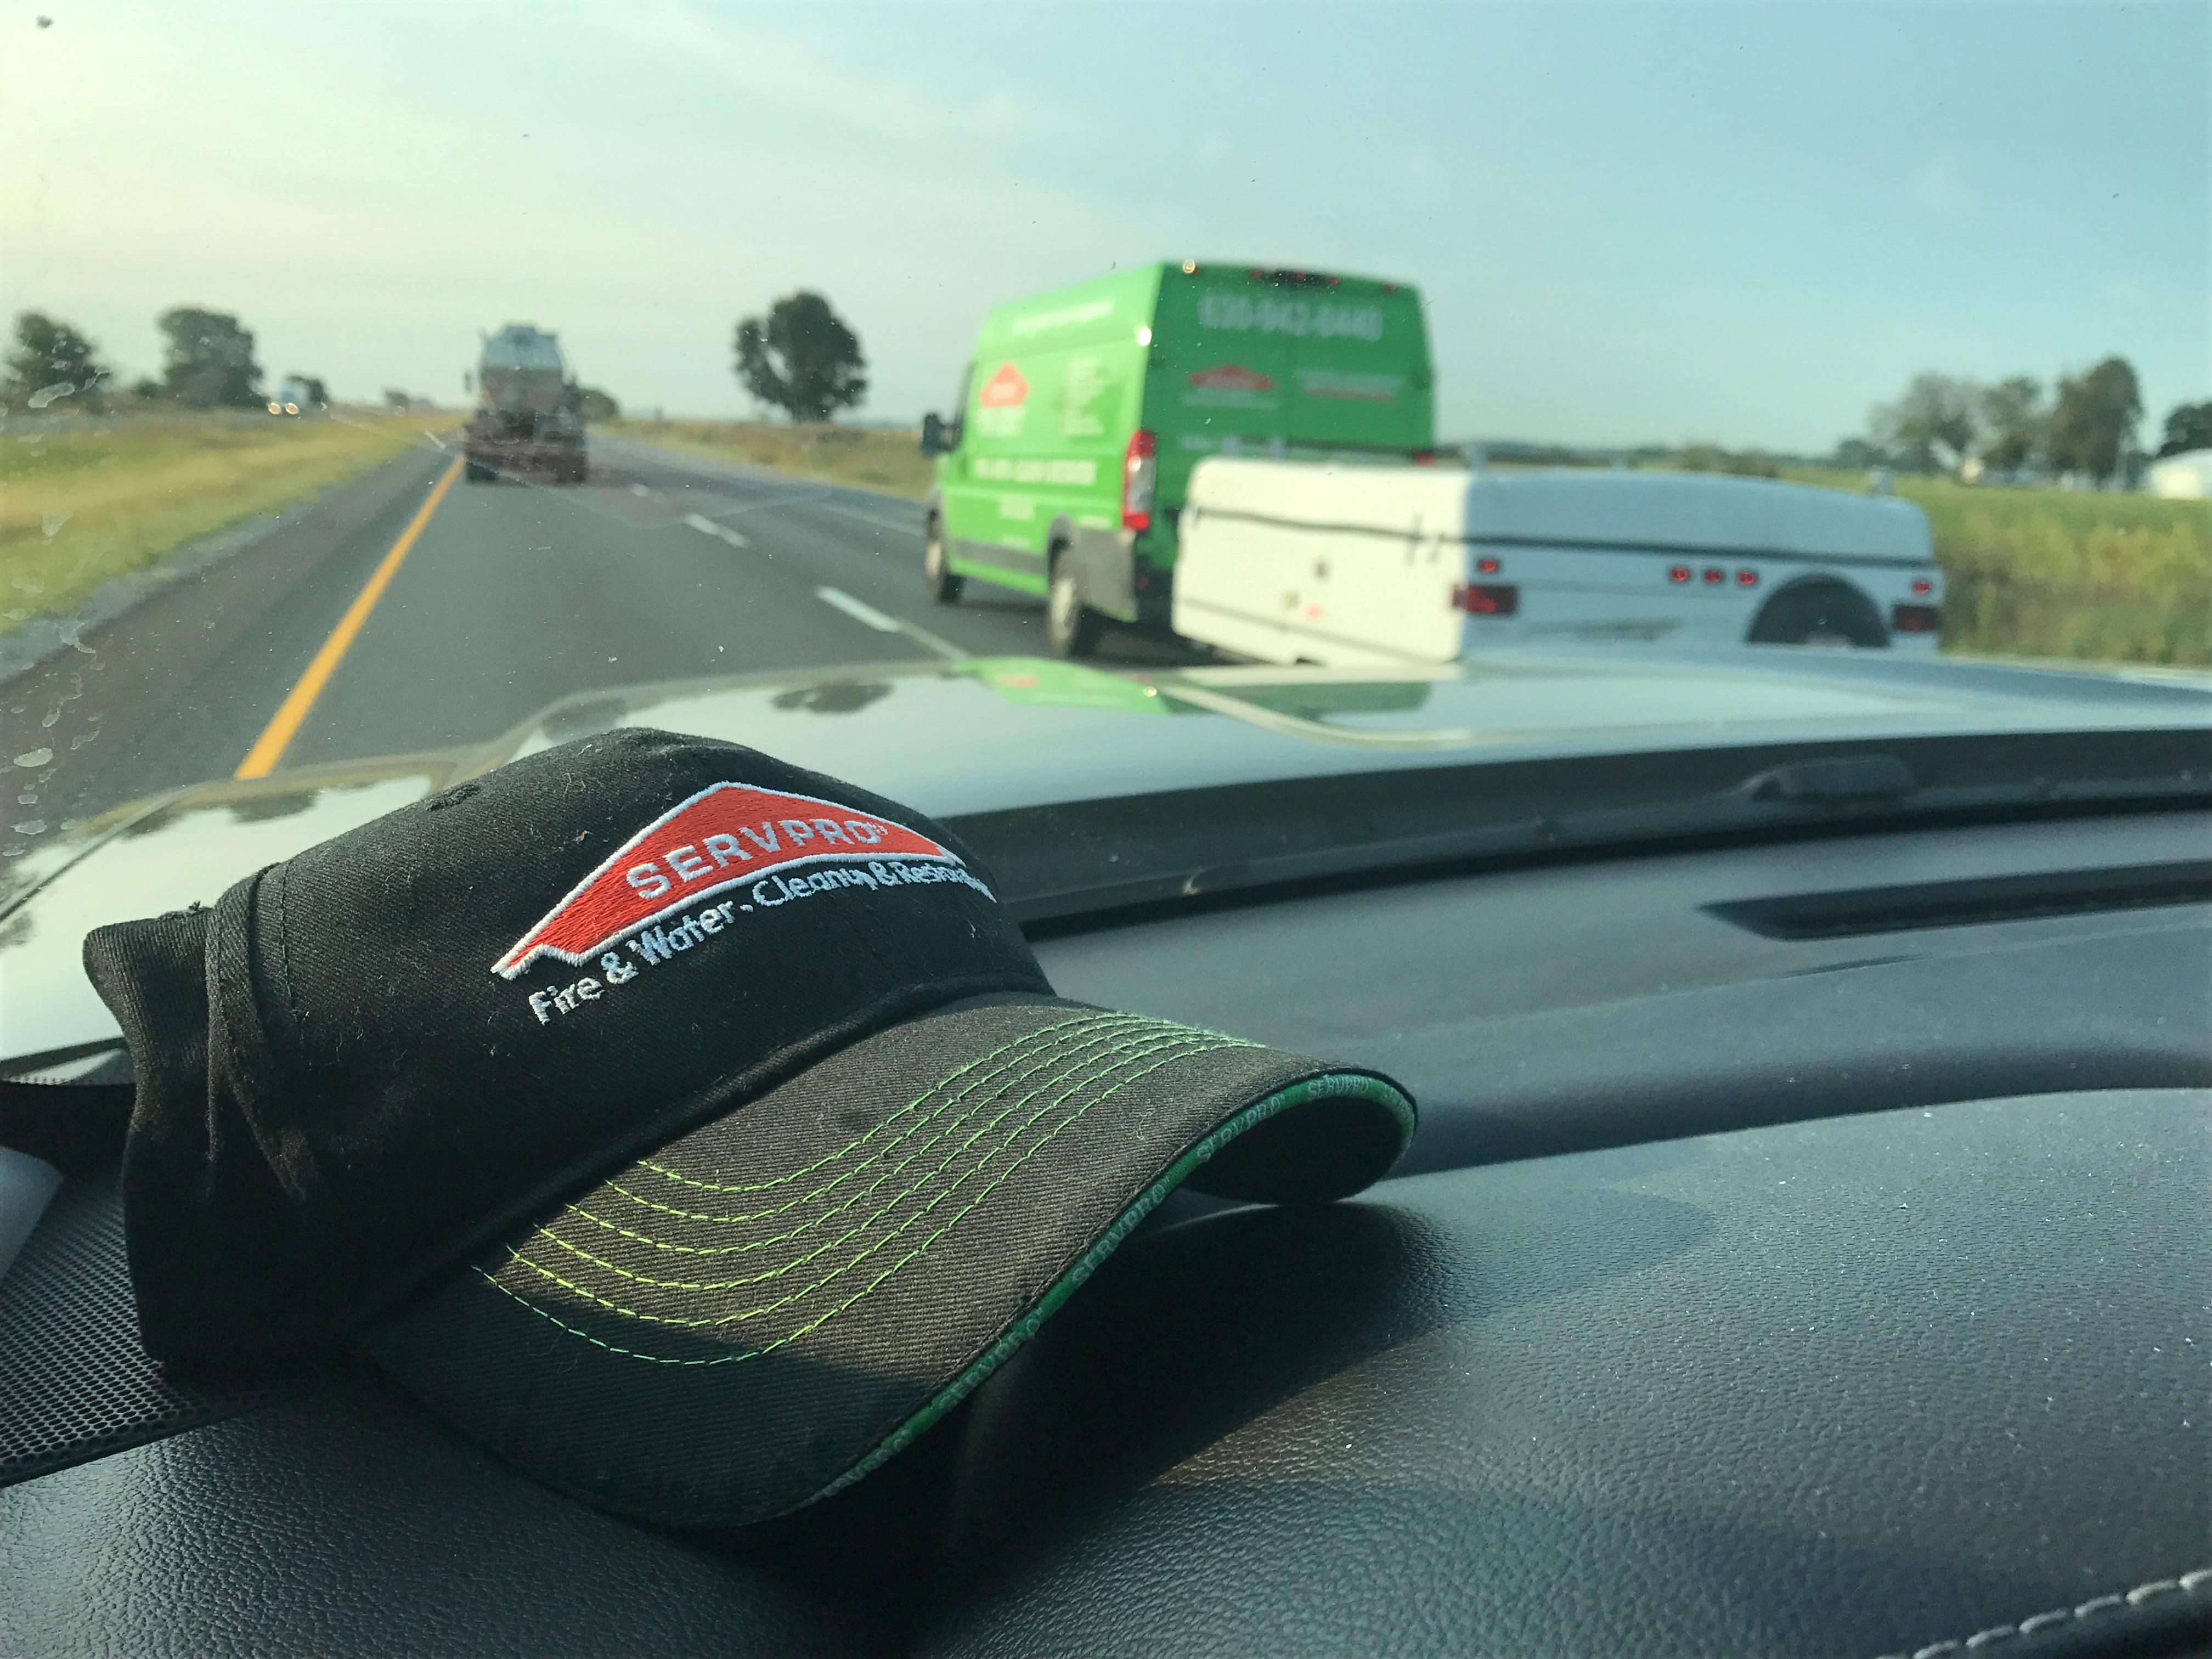 On route! SERVPRO is Ready for Whatever Happens!